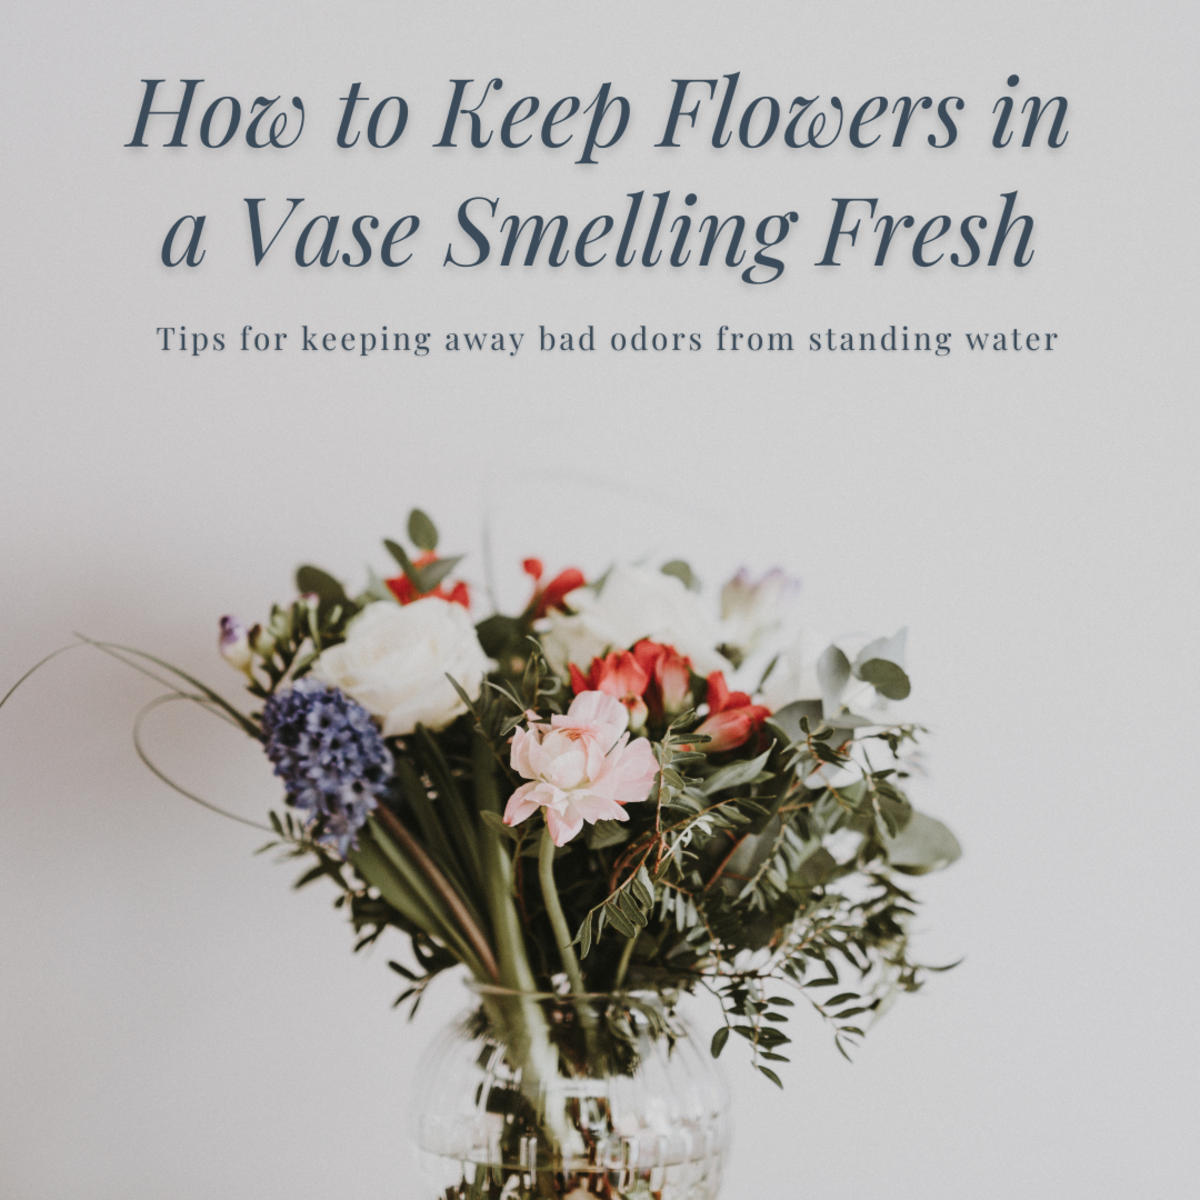 This guide will provide tips on how to keep foul odors away from your vase full of fresh flowers.